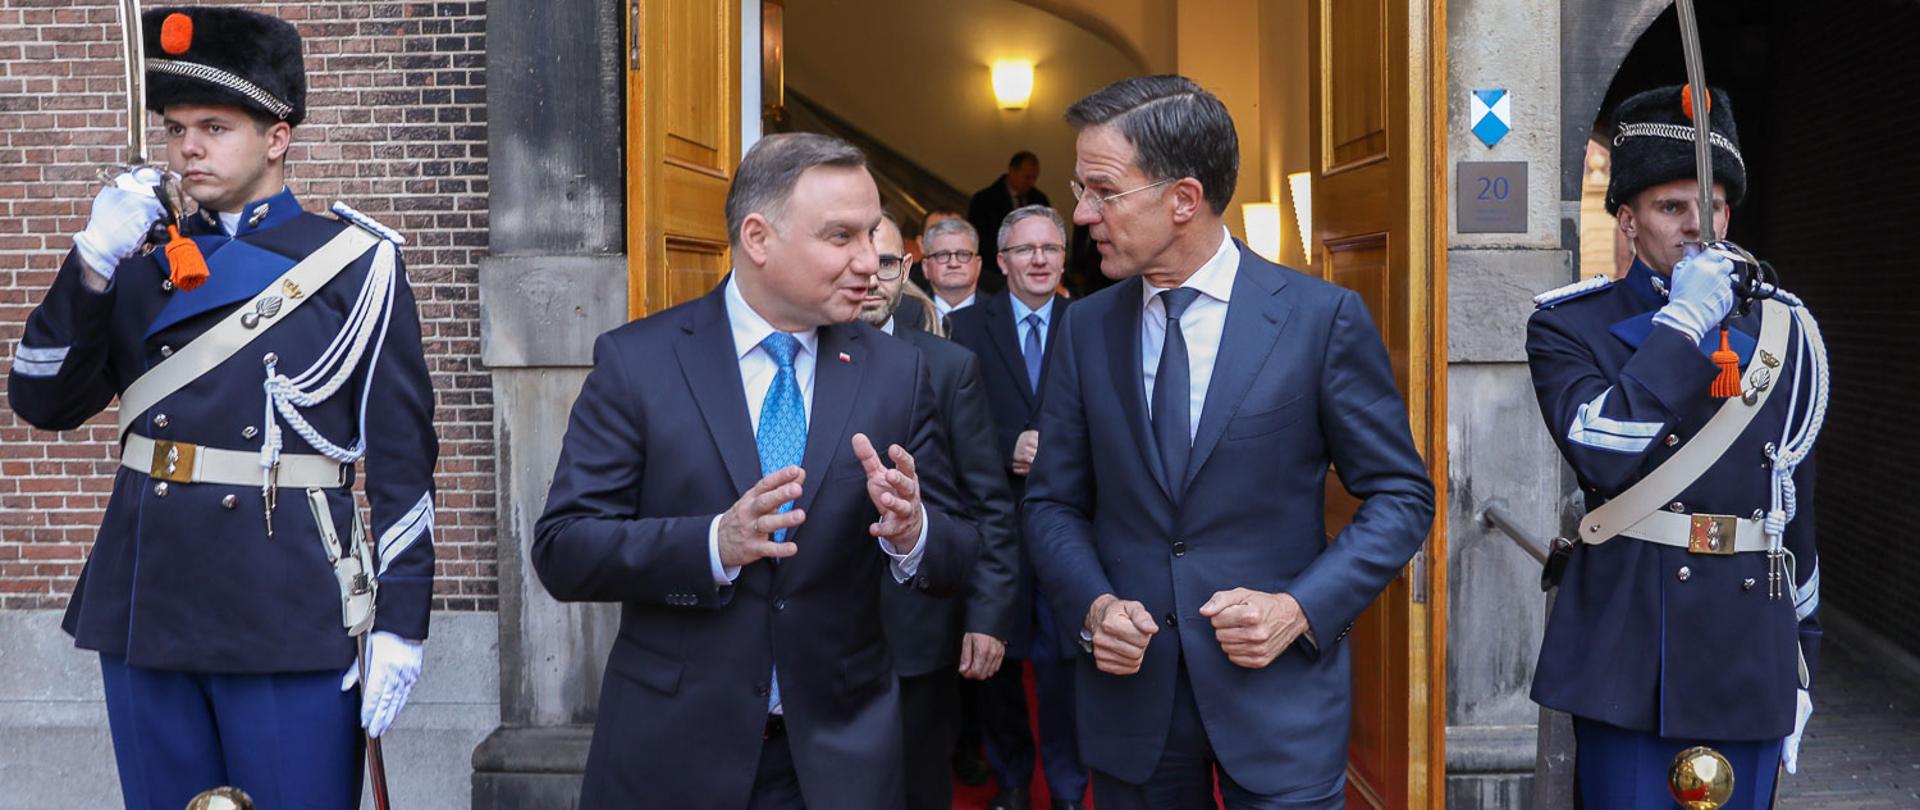 President Andrzej Duda during his visit to Netherlands